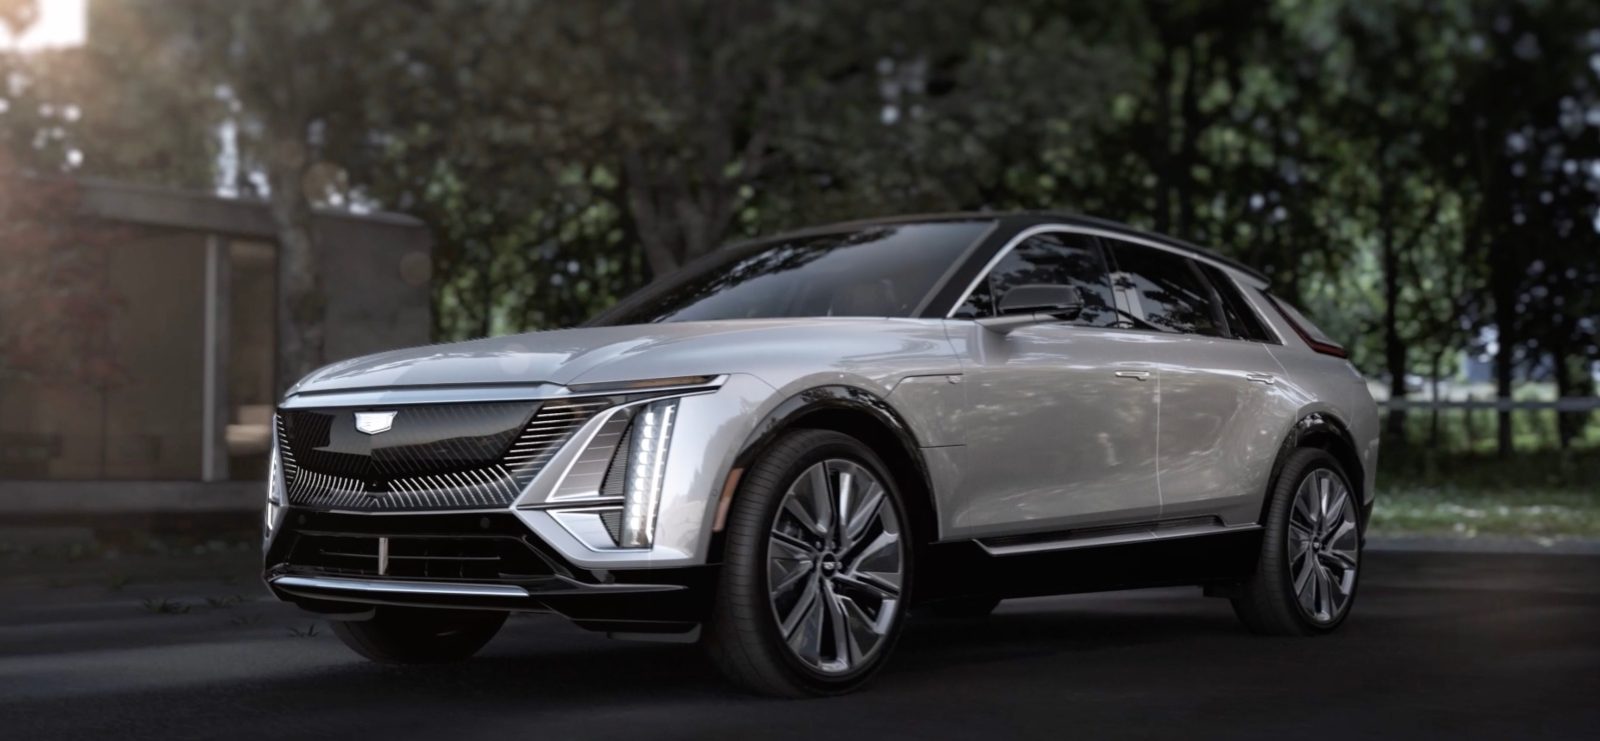 After losing dealers over its electric move, Cadillac is now gaining new ones